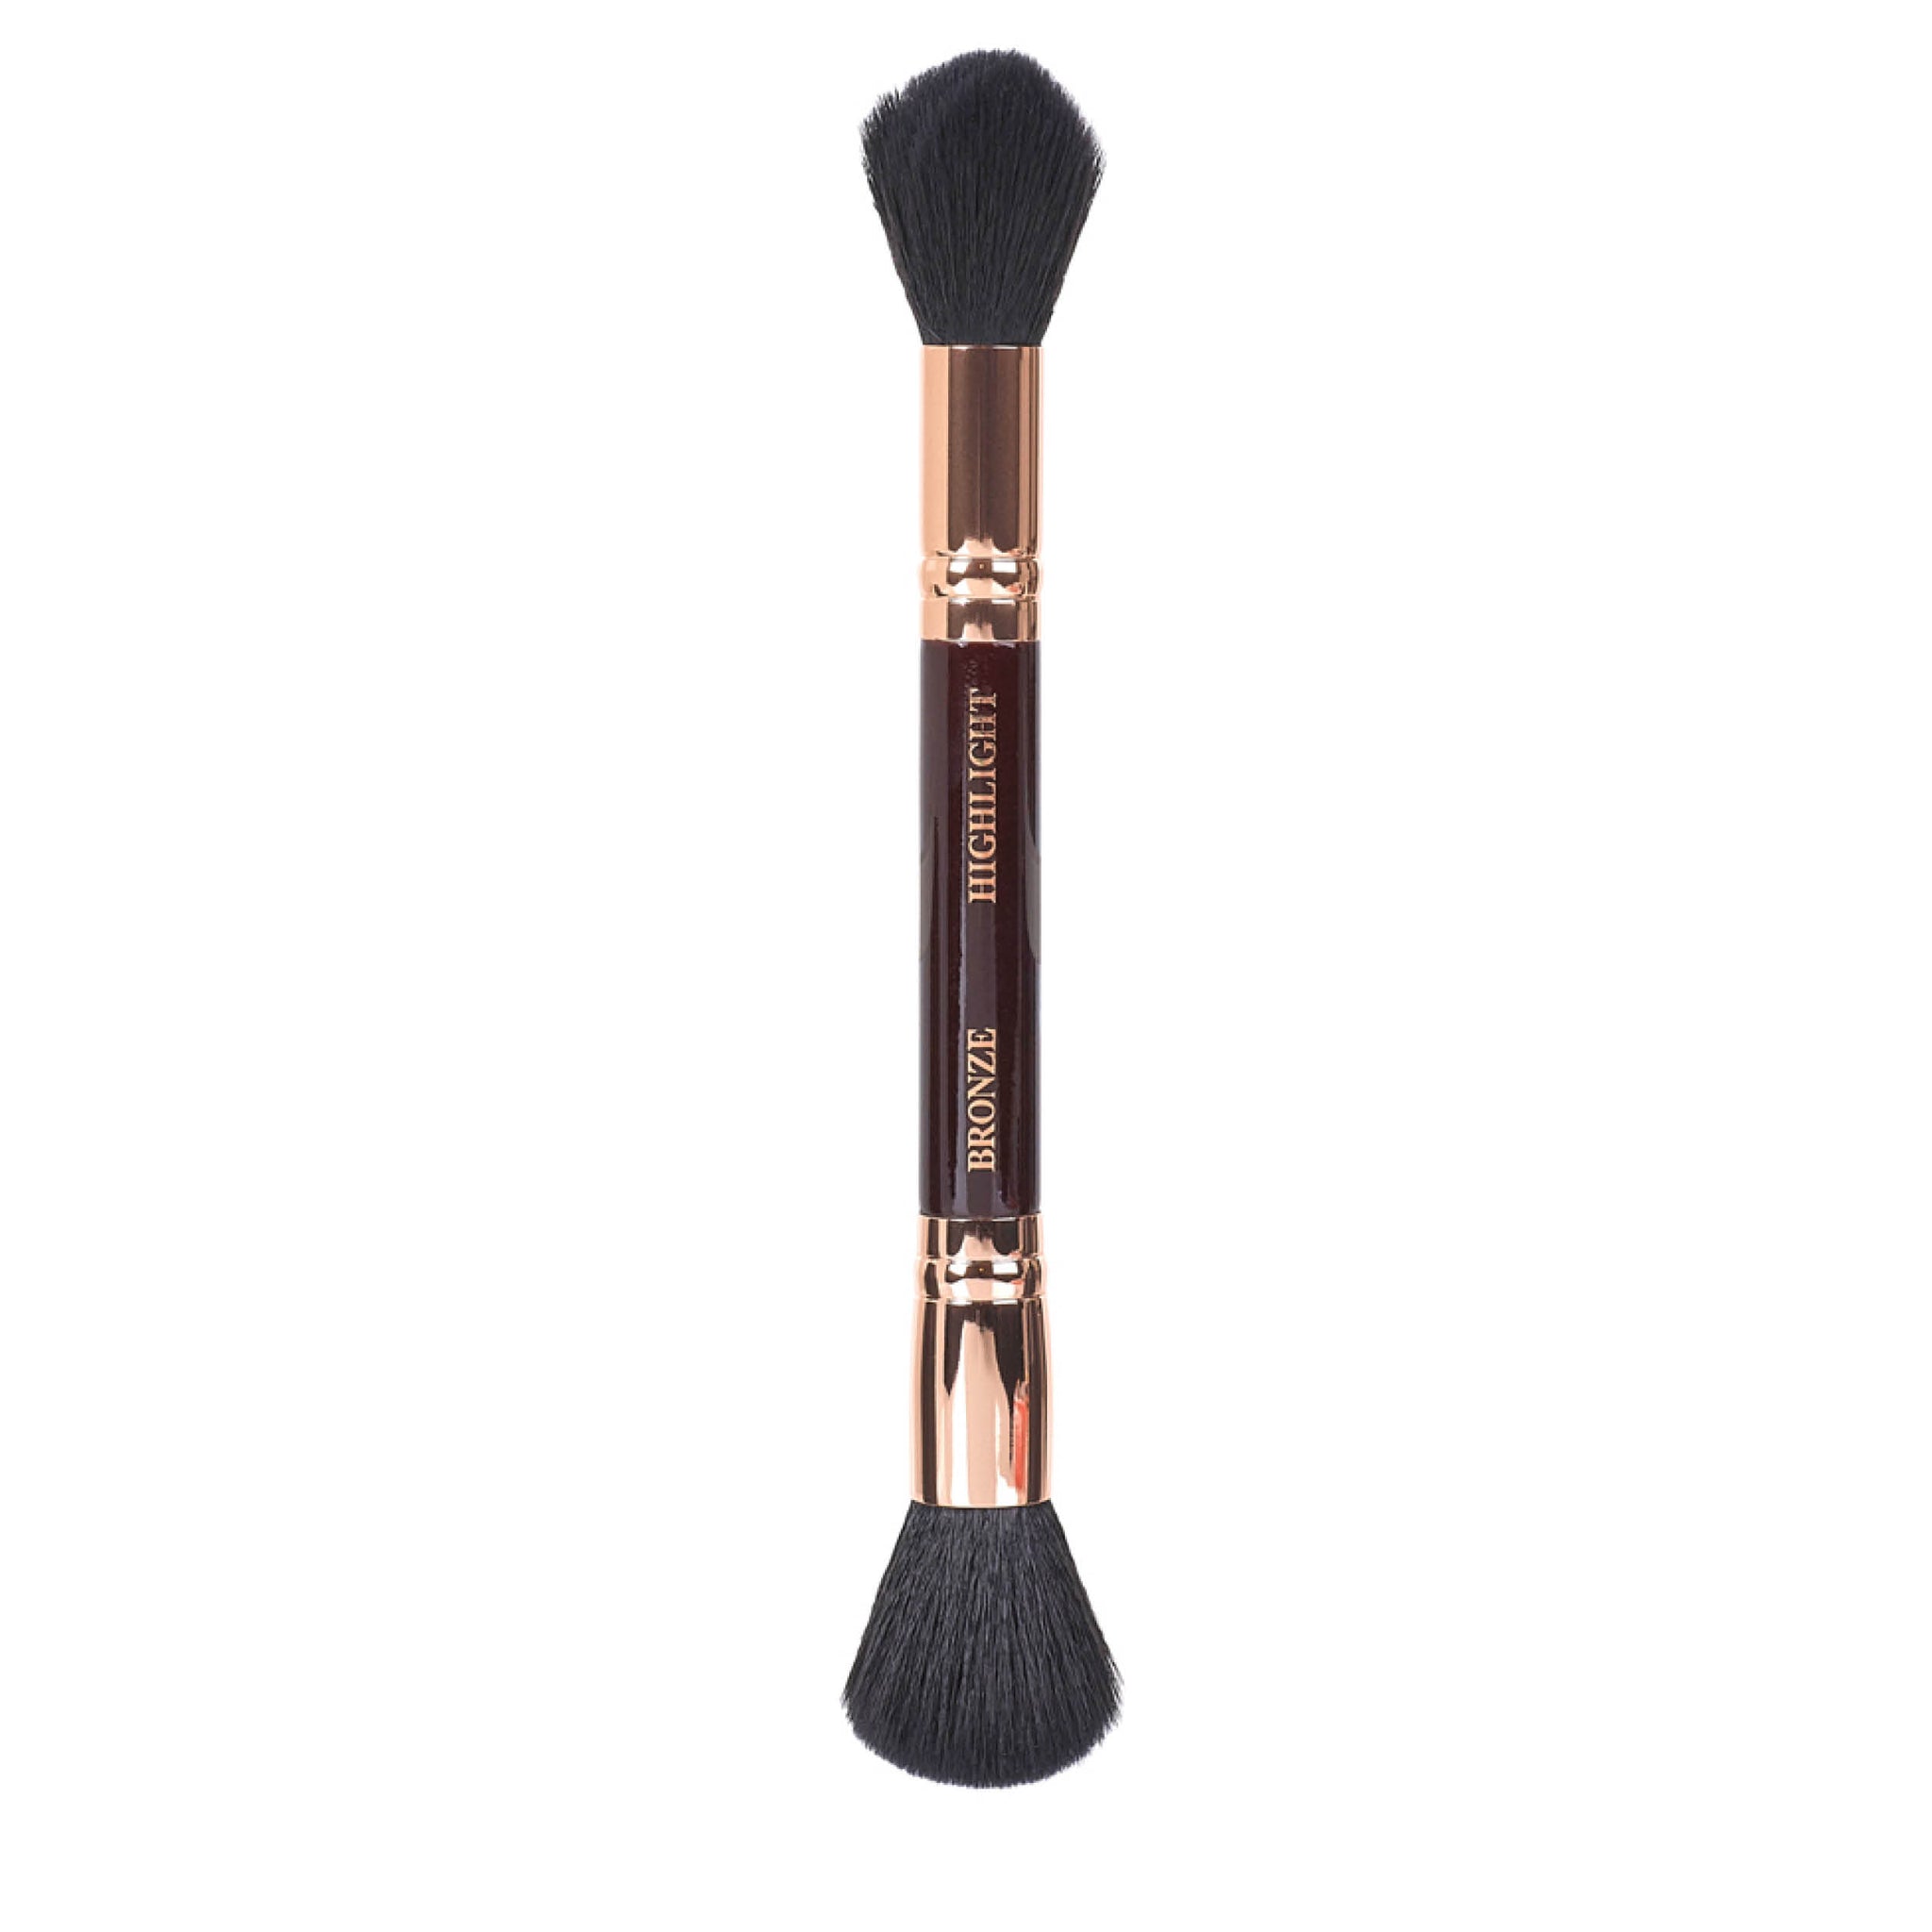 Sculpted By Aimee Connolly Double Ended Sculpting Brush